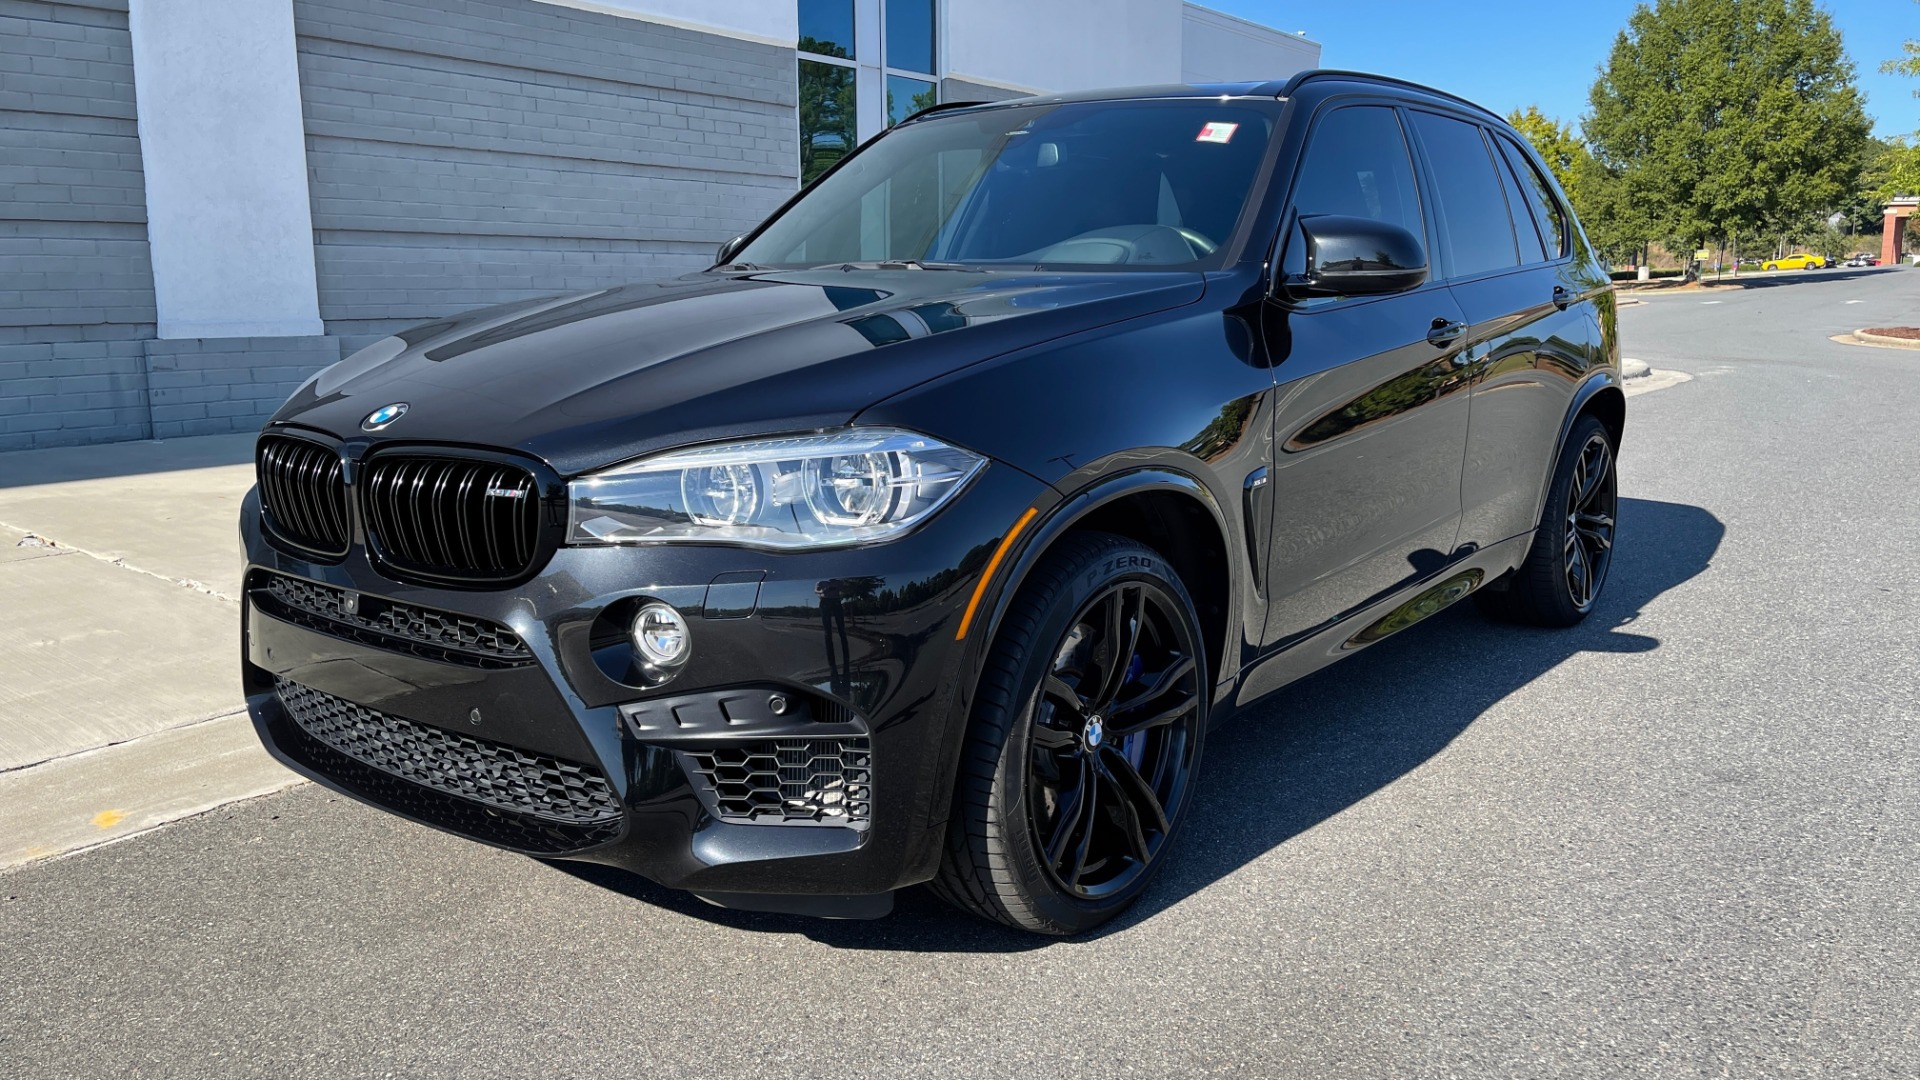 Used 2018 BMW X5 M EXECUTIVE PKG / NAV / SUNROOF / BLIND SPOT / LANE DEPART / CAMERAS for sale Sold at Formula Imports in Charlotte NC 28227 3